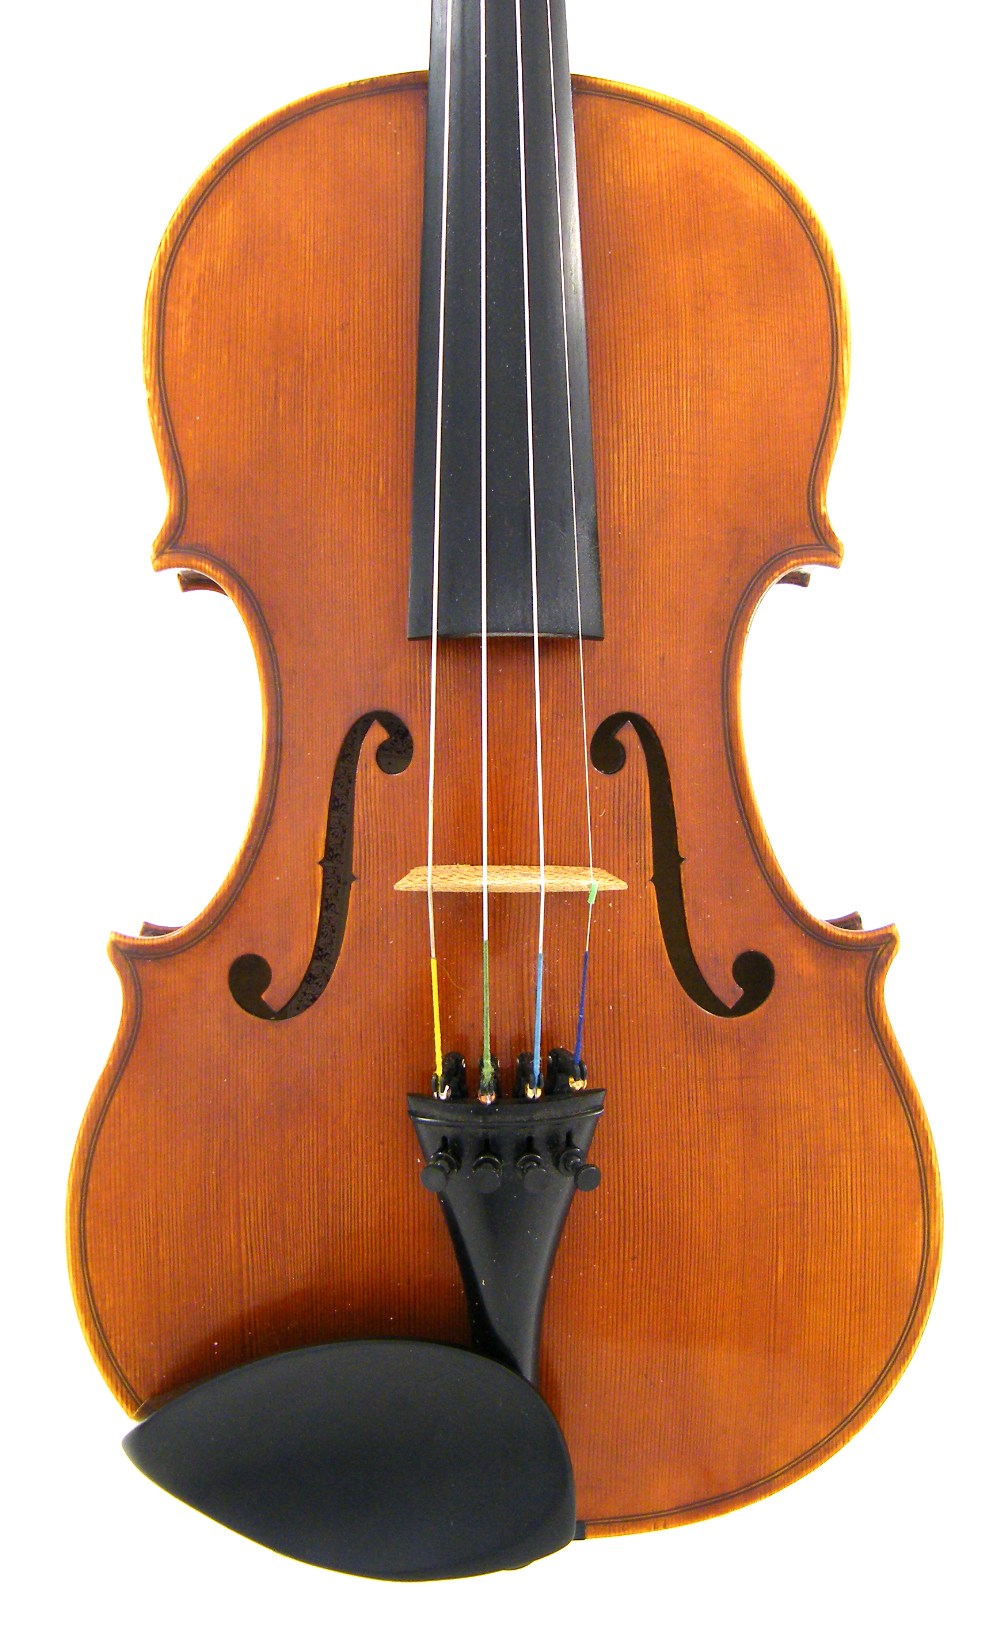 Contemporary violin by and labelled Michaela Wedemeyer 2009, 13 7/8", 35.20cm *This instrument is